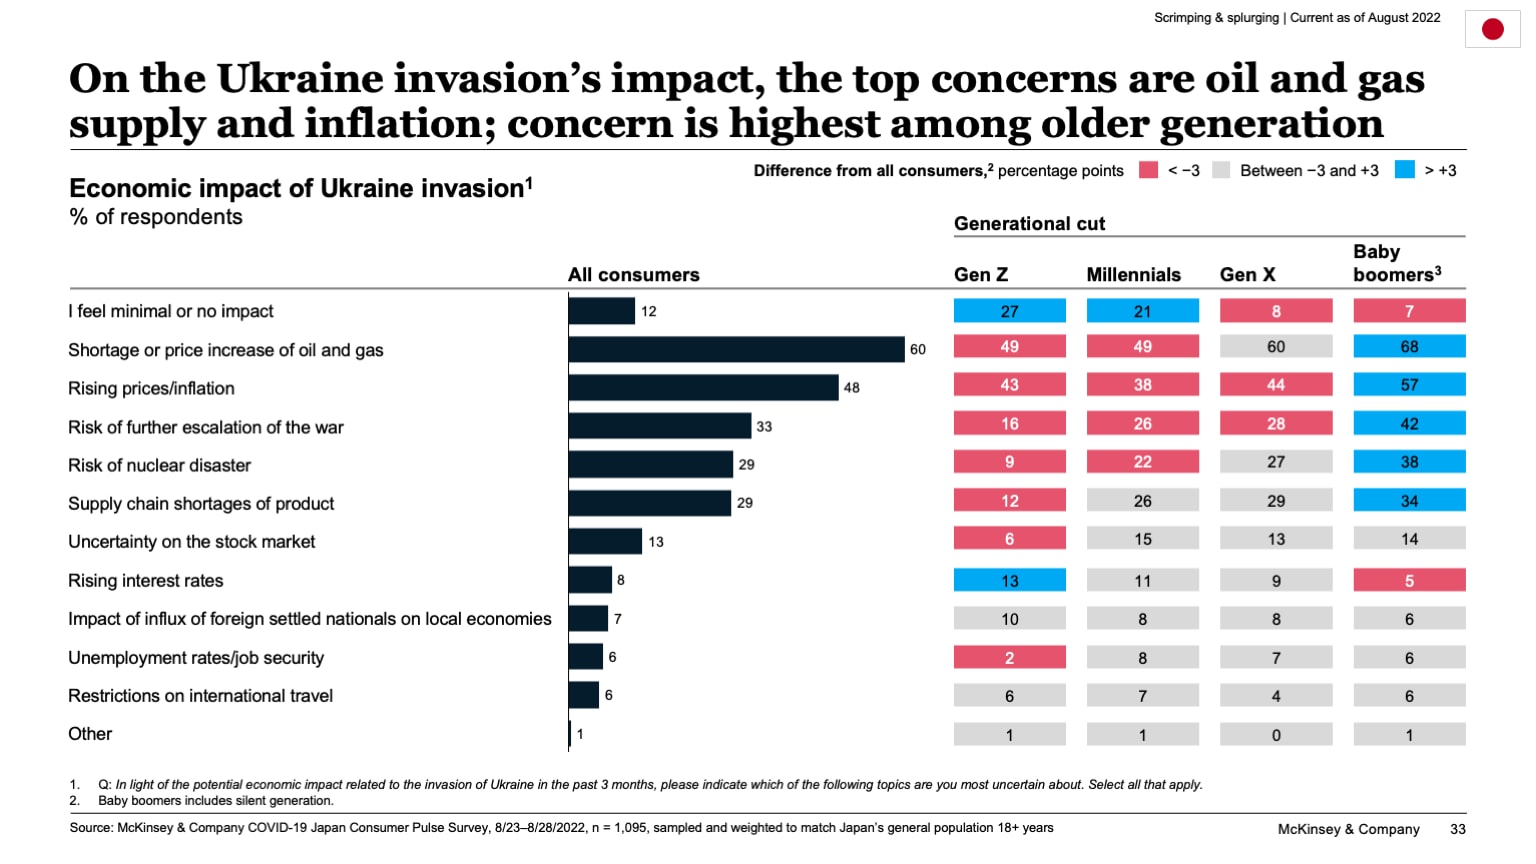 On the Ukraine invasion’s impact, the top concerns are oil and gas supply and inflation; concern is highest among older generation